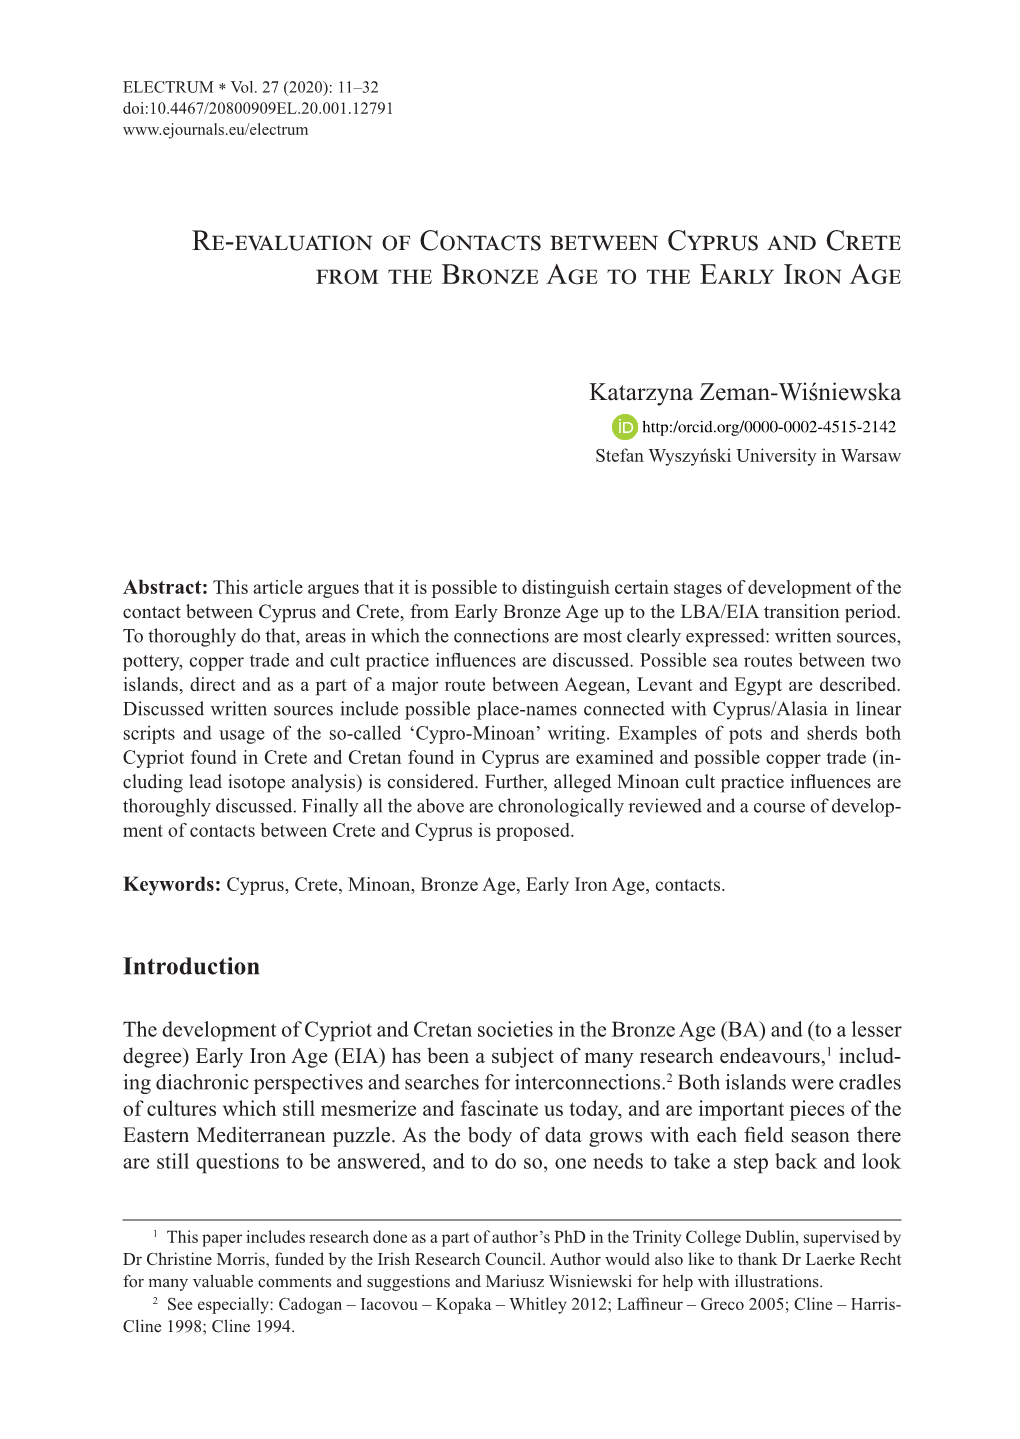 Re-Evaluation of Contacts Between Cyprus and Crete from the Bronze Age to the Early Iron Age